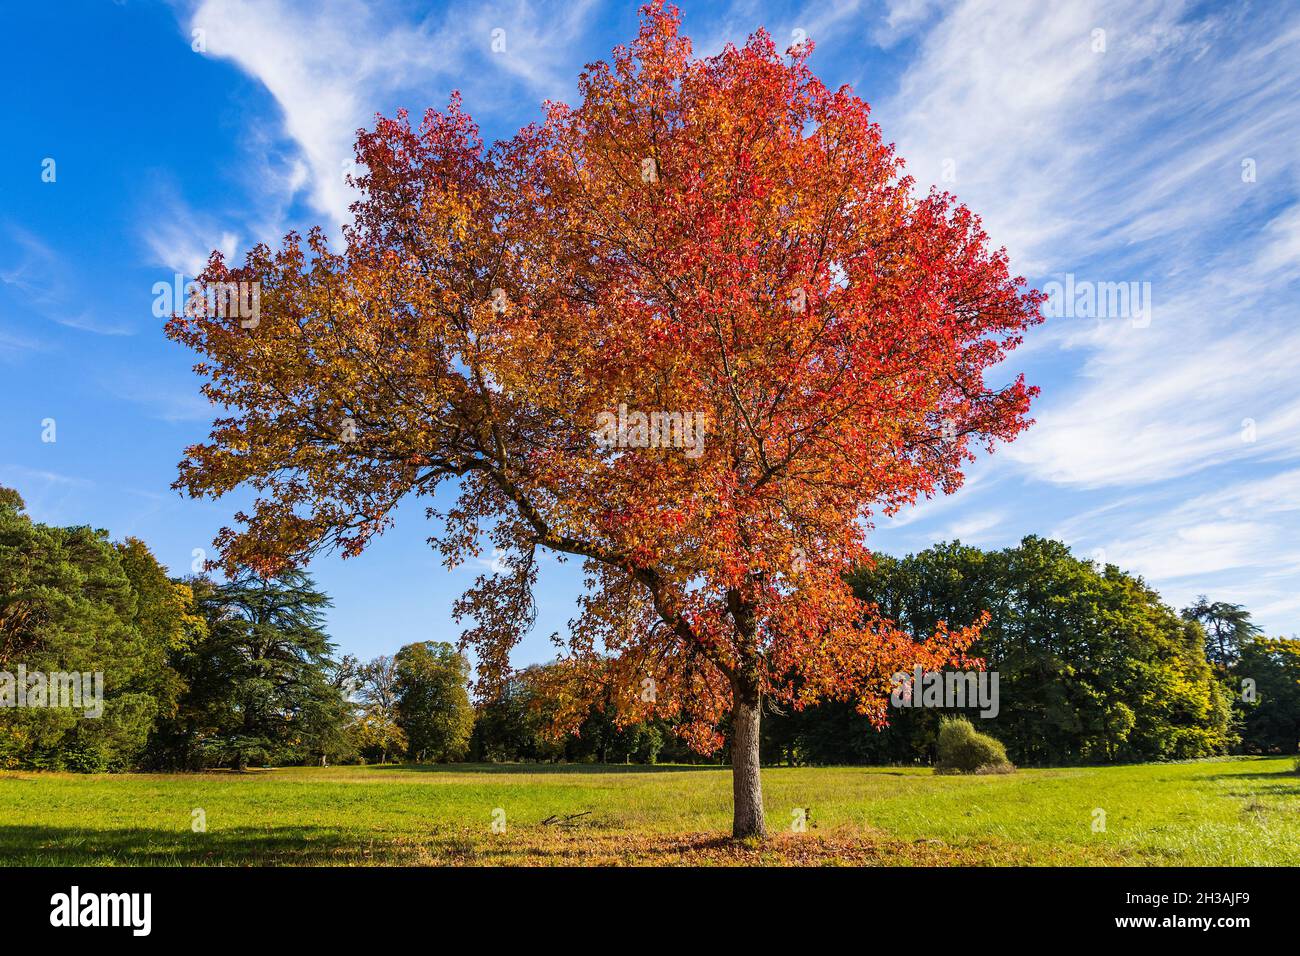 Acer tree with autumn foliage in parkland at Chateau de Azay-le-Ferron, Indre (36), France. Stock Photo